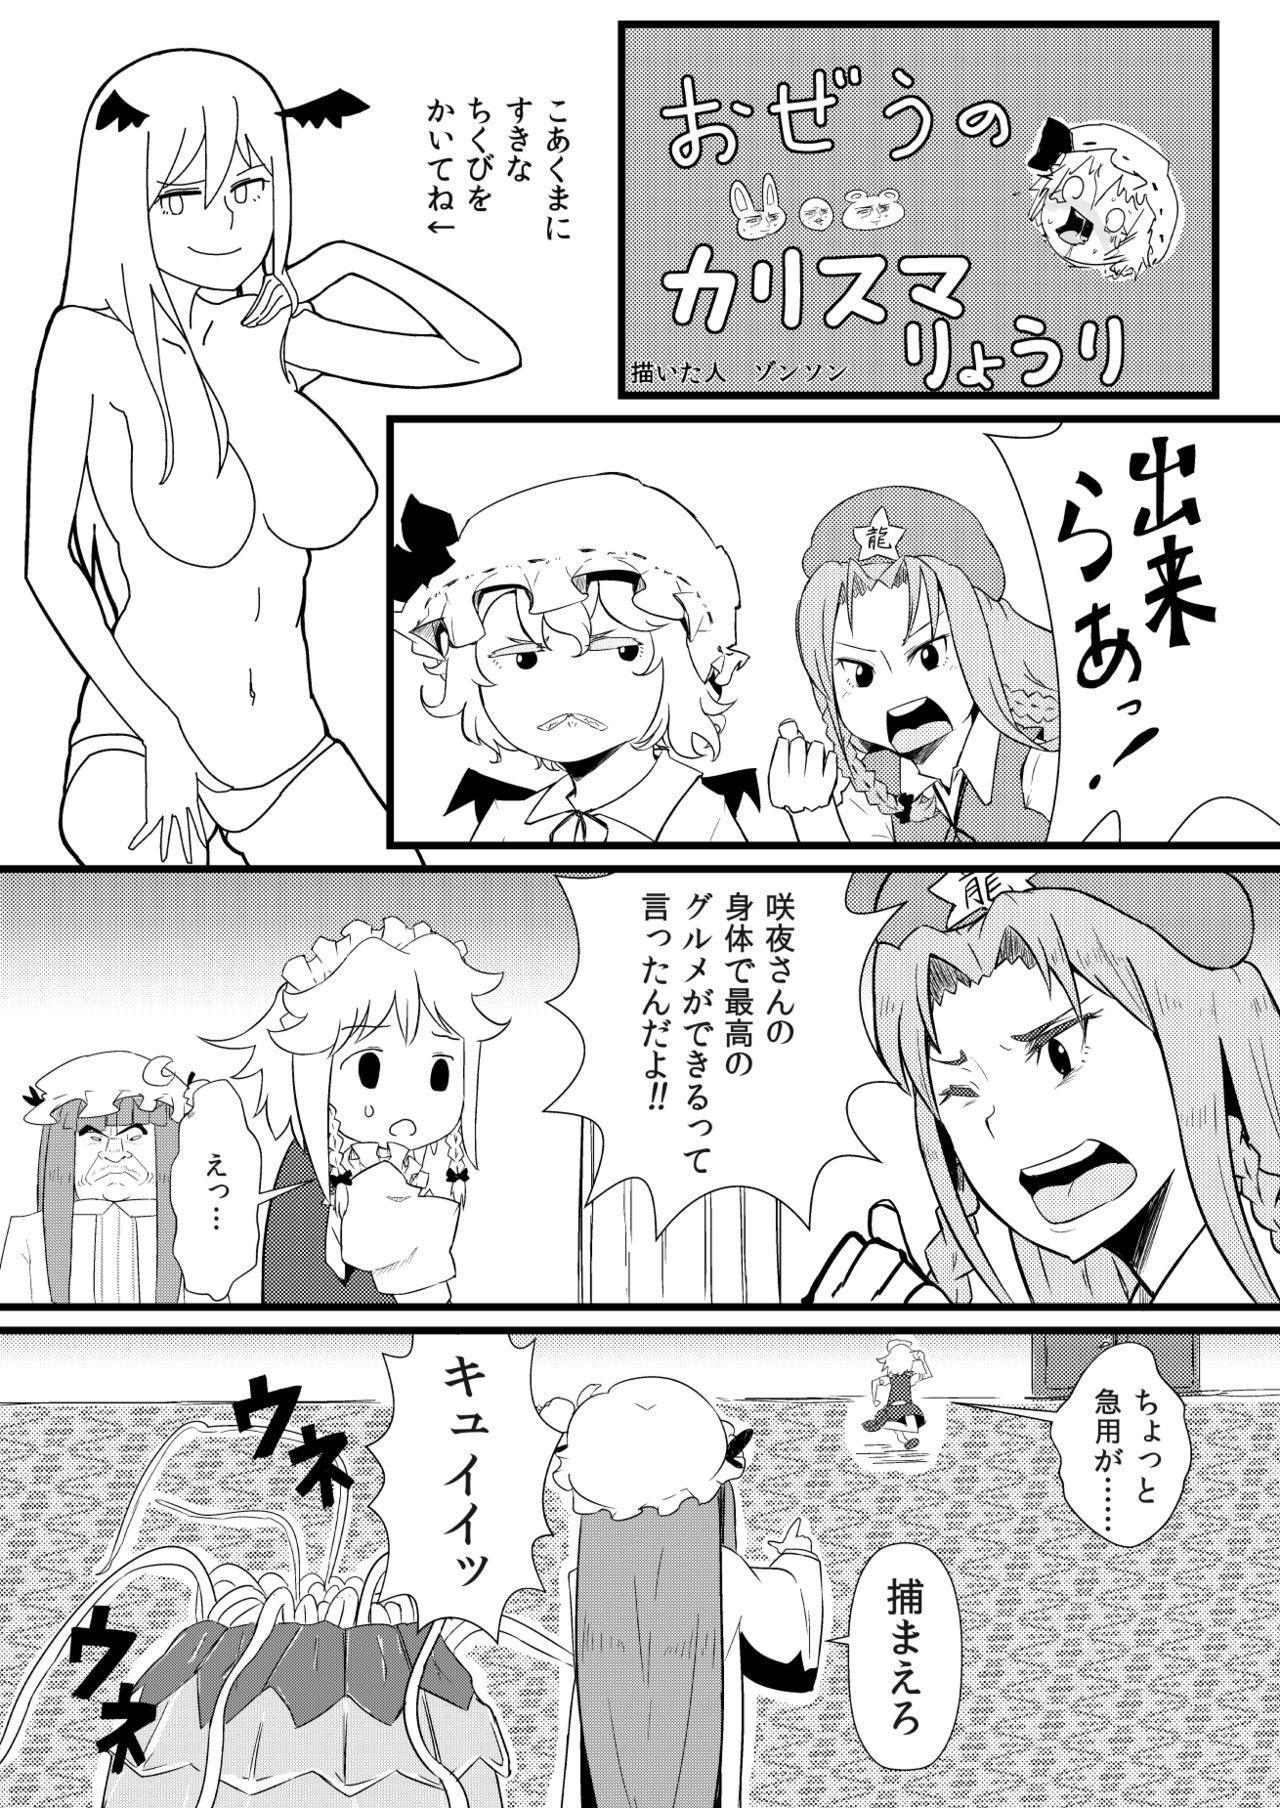 Women Sucking 東方板としあき合同誌5 - Touhou project Casada - Page 5